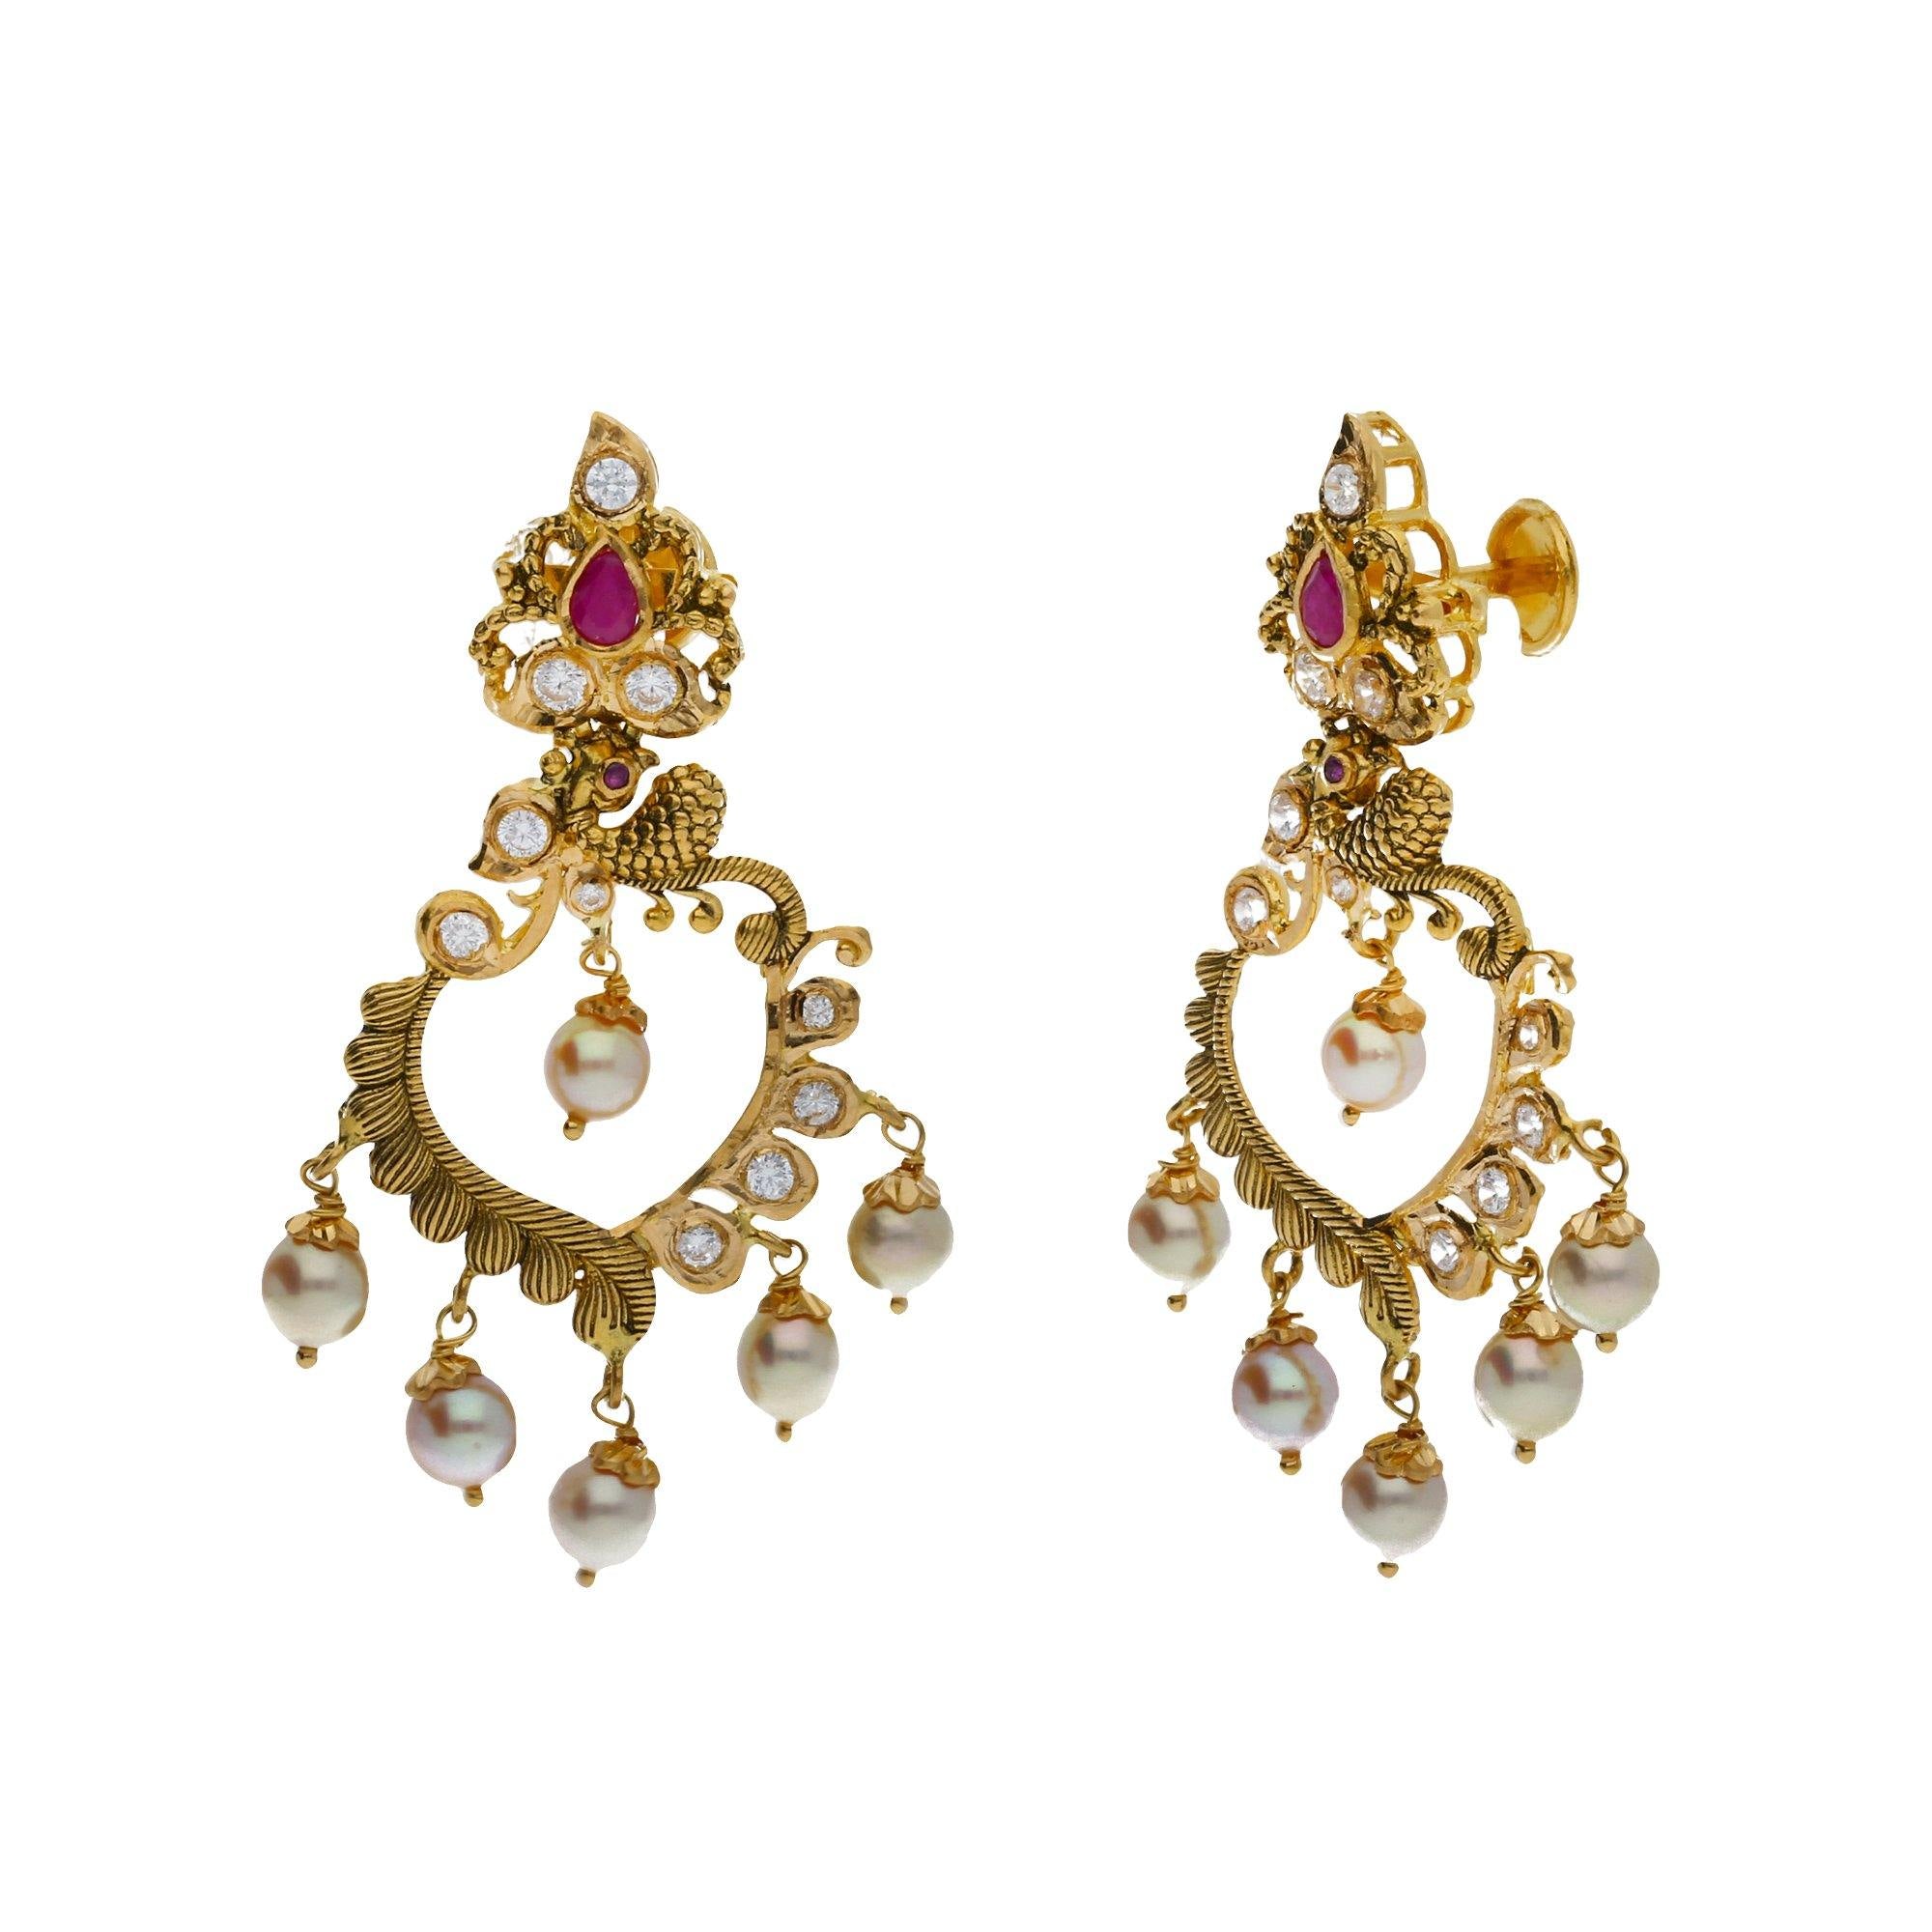 Treasure this Antique Gold Pendant Earrings From the Catalogue of Temple  Jewellery PS25013